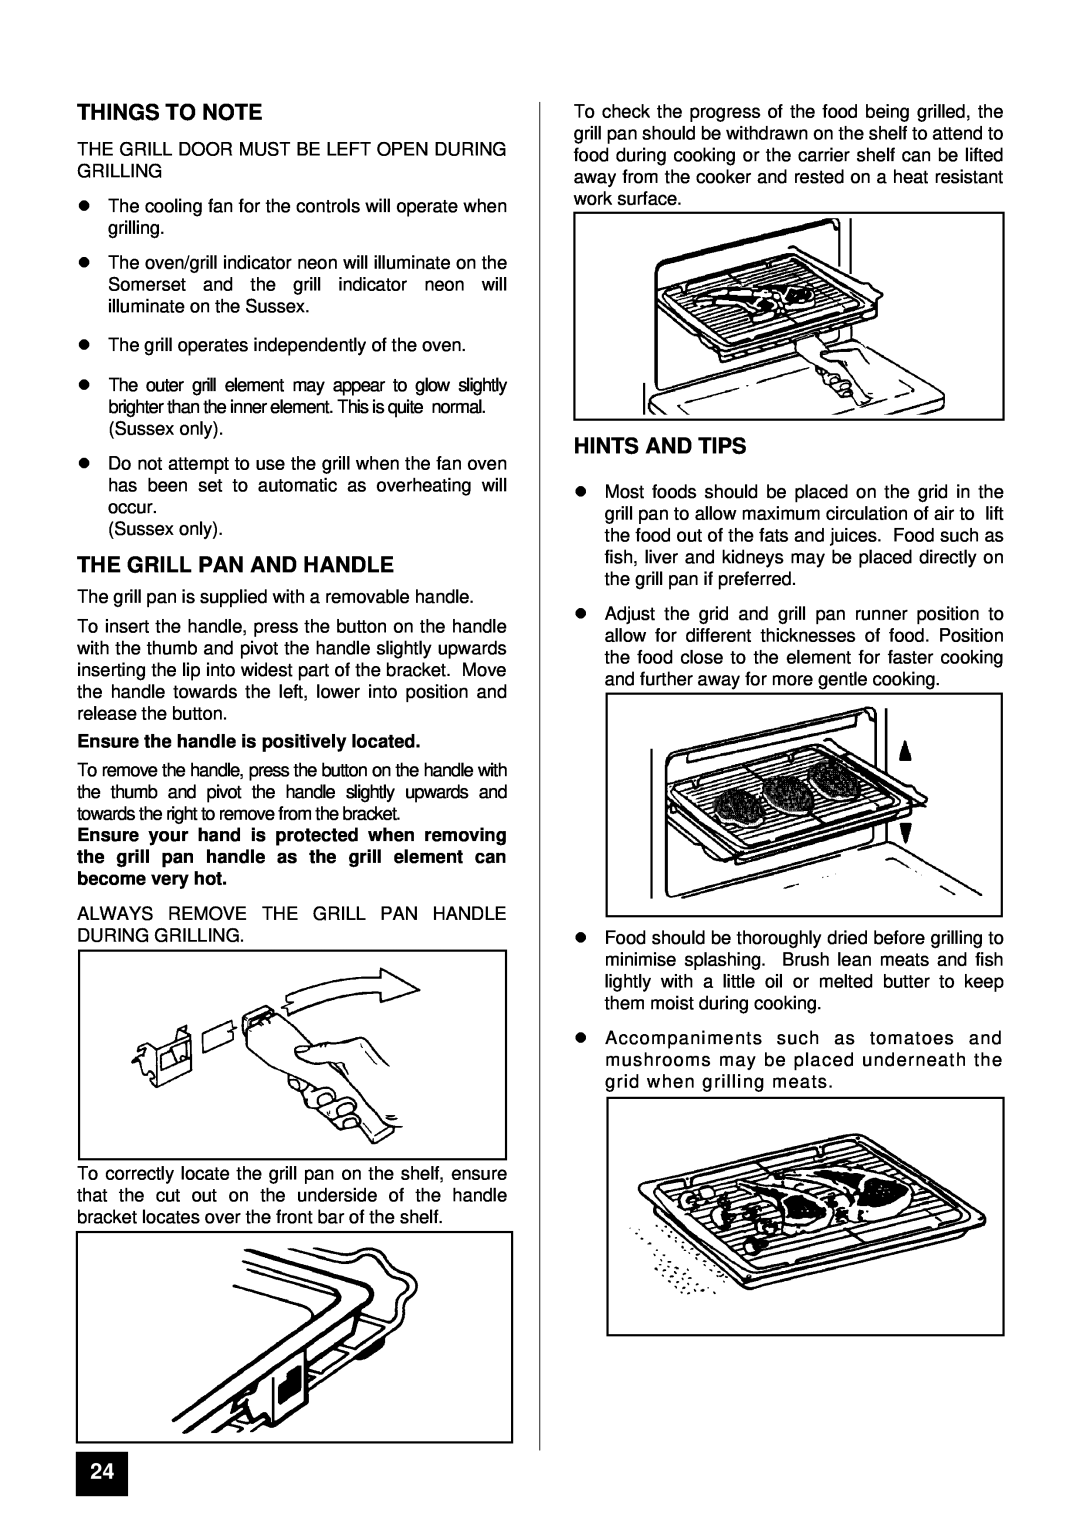 Tricity Bendix SOMERSET Things To Note, The Grill Pan And Handle, Hints And Tips, Ensure the handle is positively located 